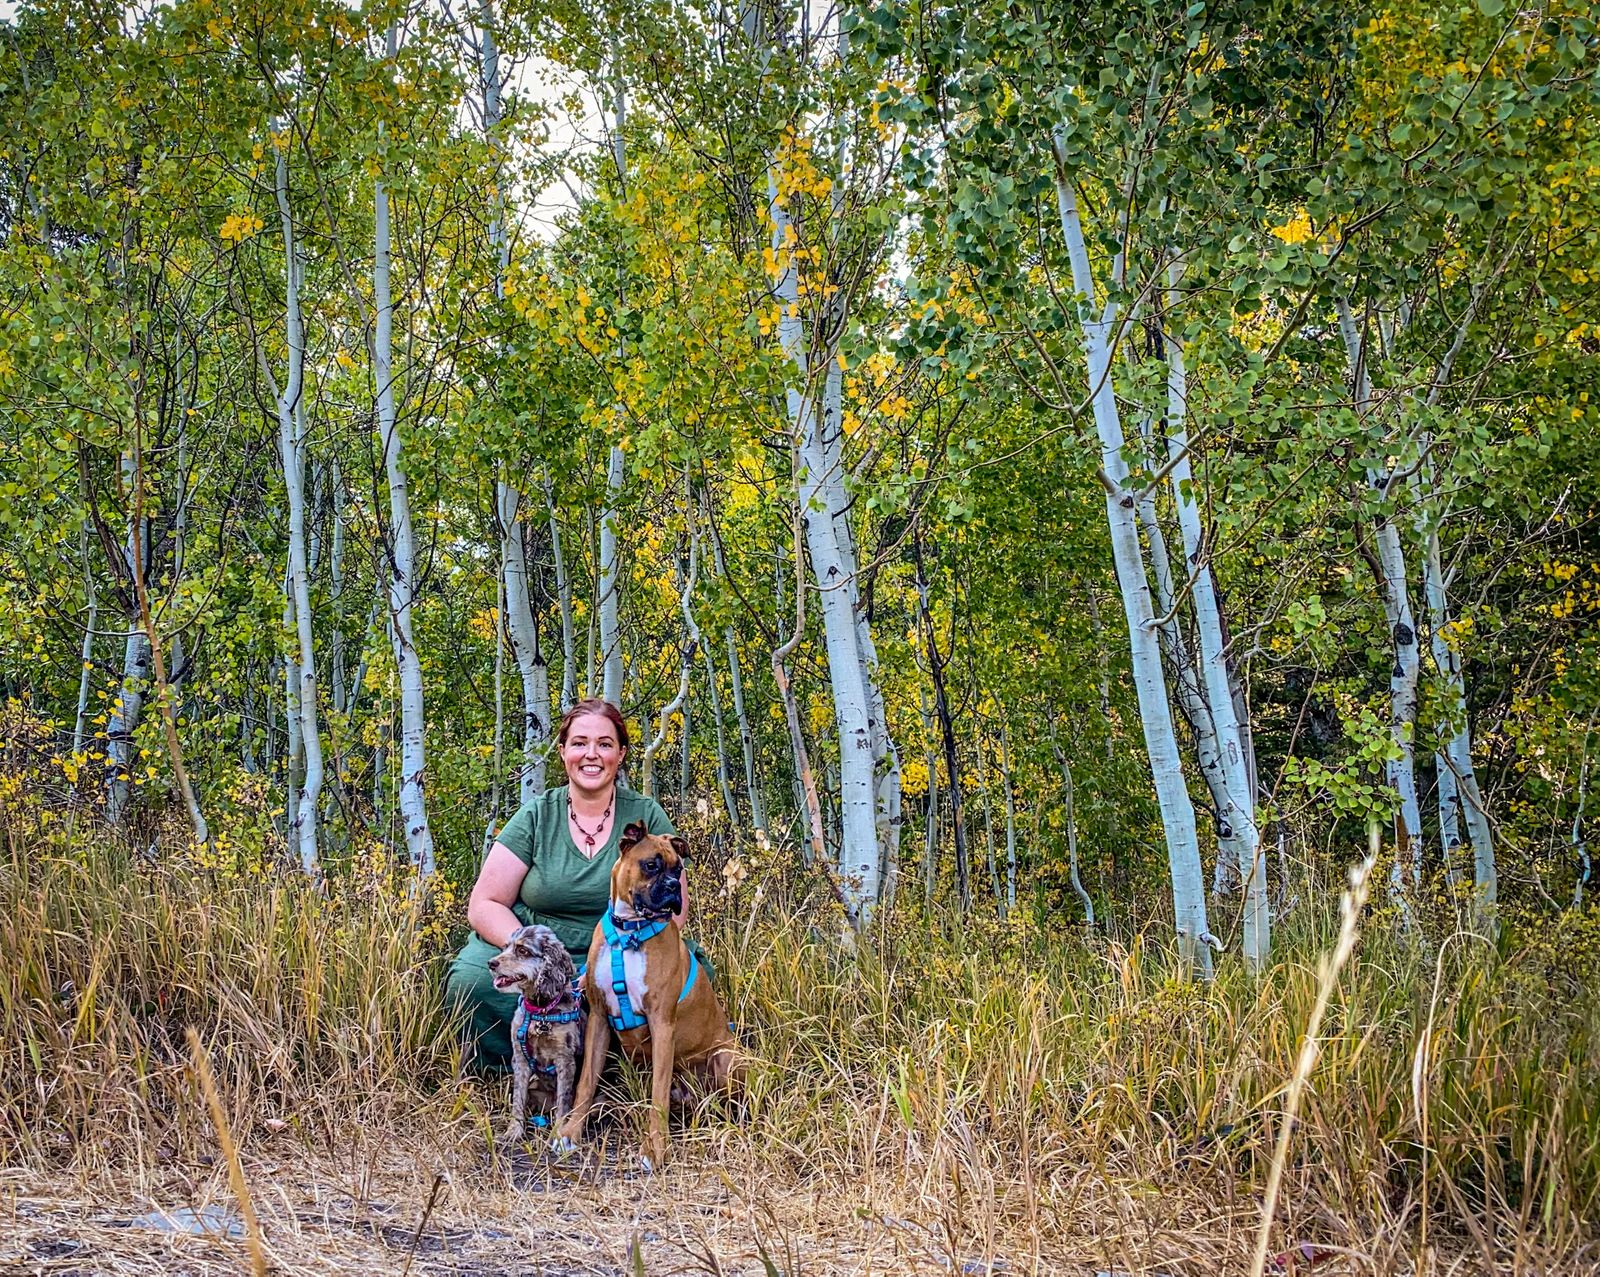 Janiel with her dogs in front of aspen trees starting to turn yellow